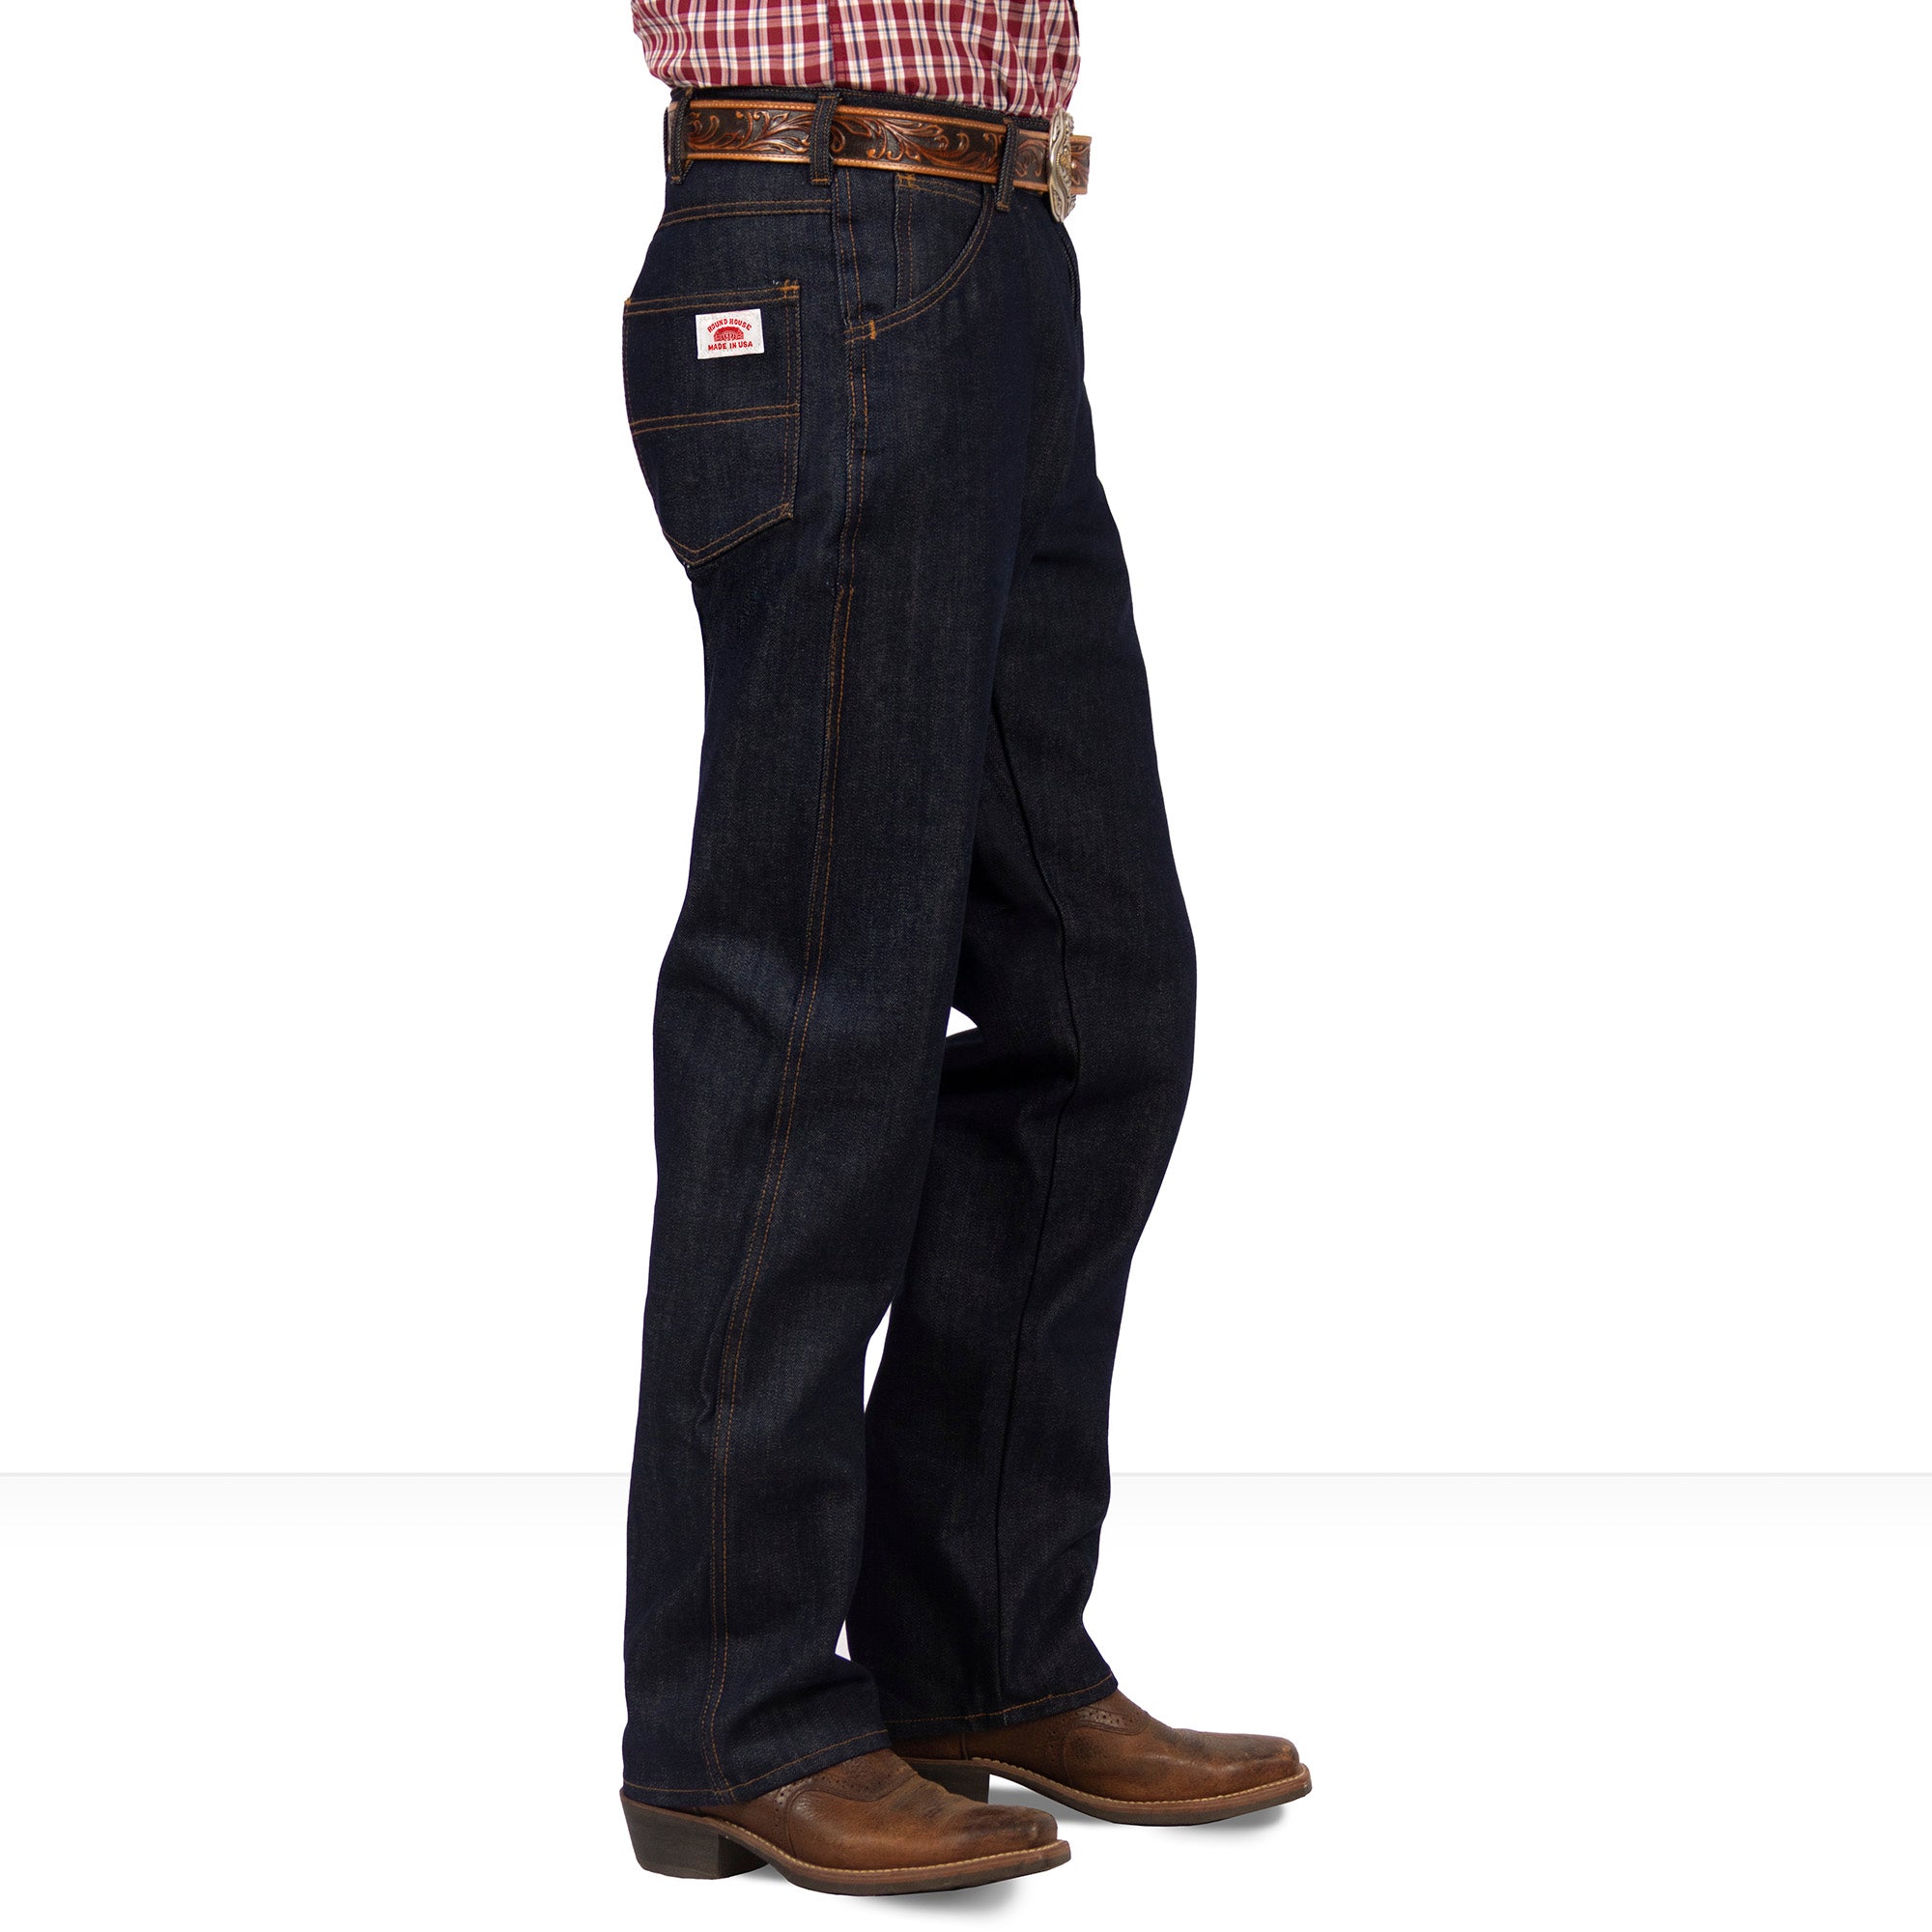 1903 American Made Jeans Cowboy 14 oz 5 Pocket Jeans Made in USA – Round  House American Made Jeans Made in USA Overalls, Workwear